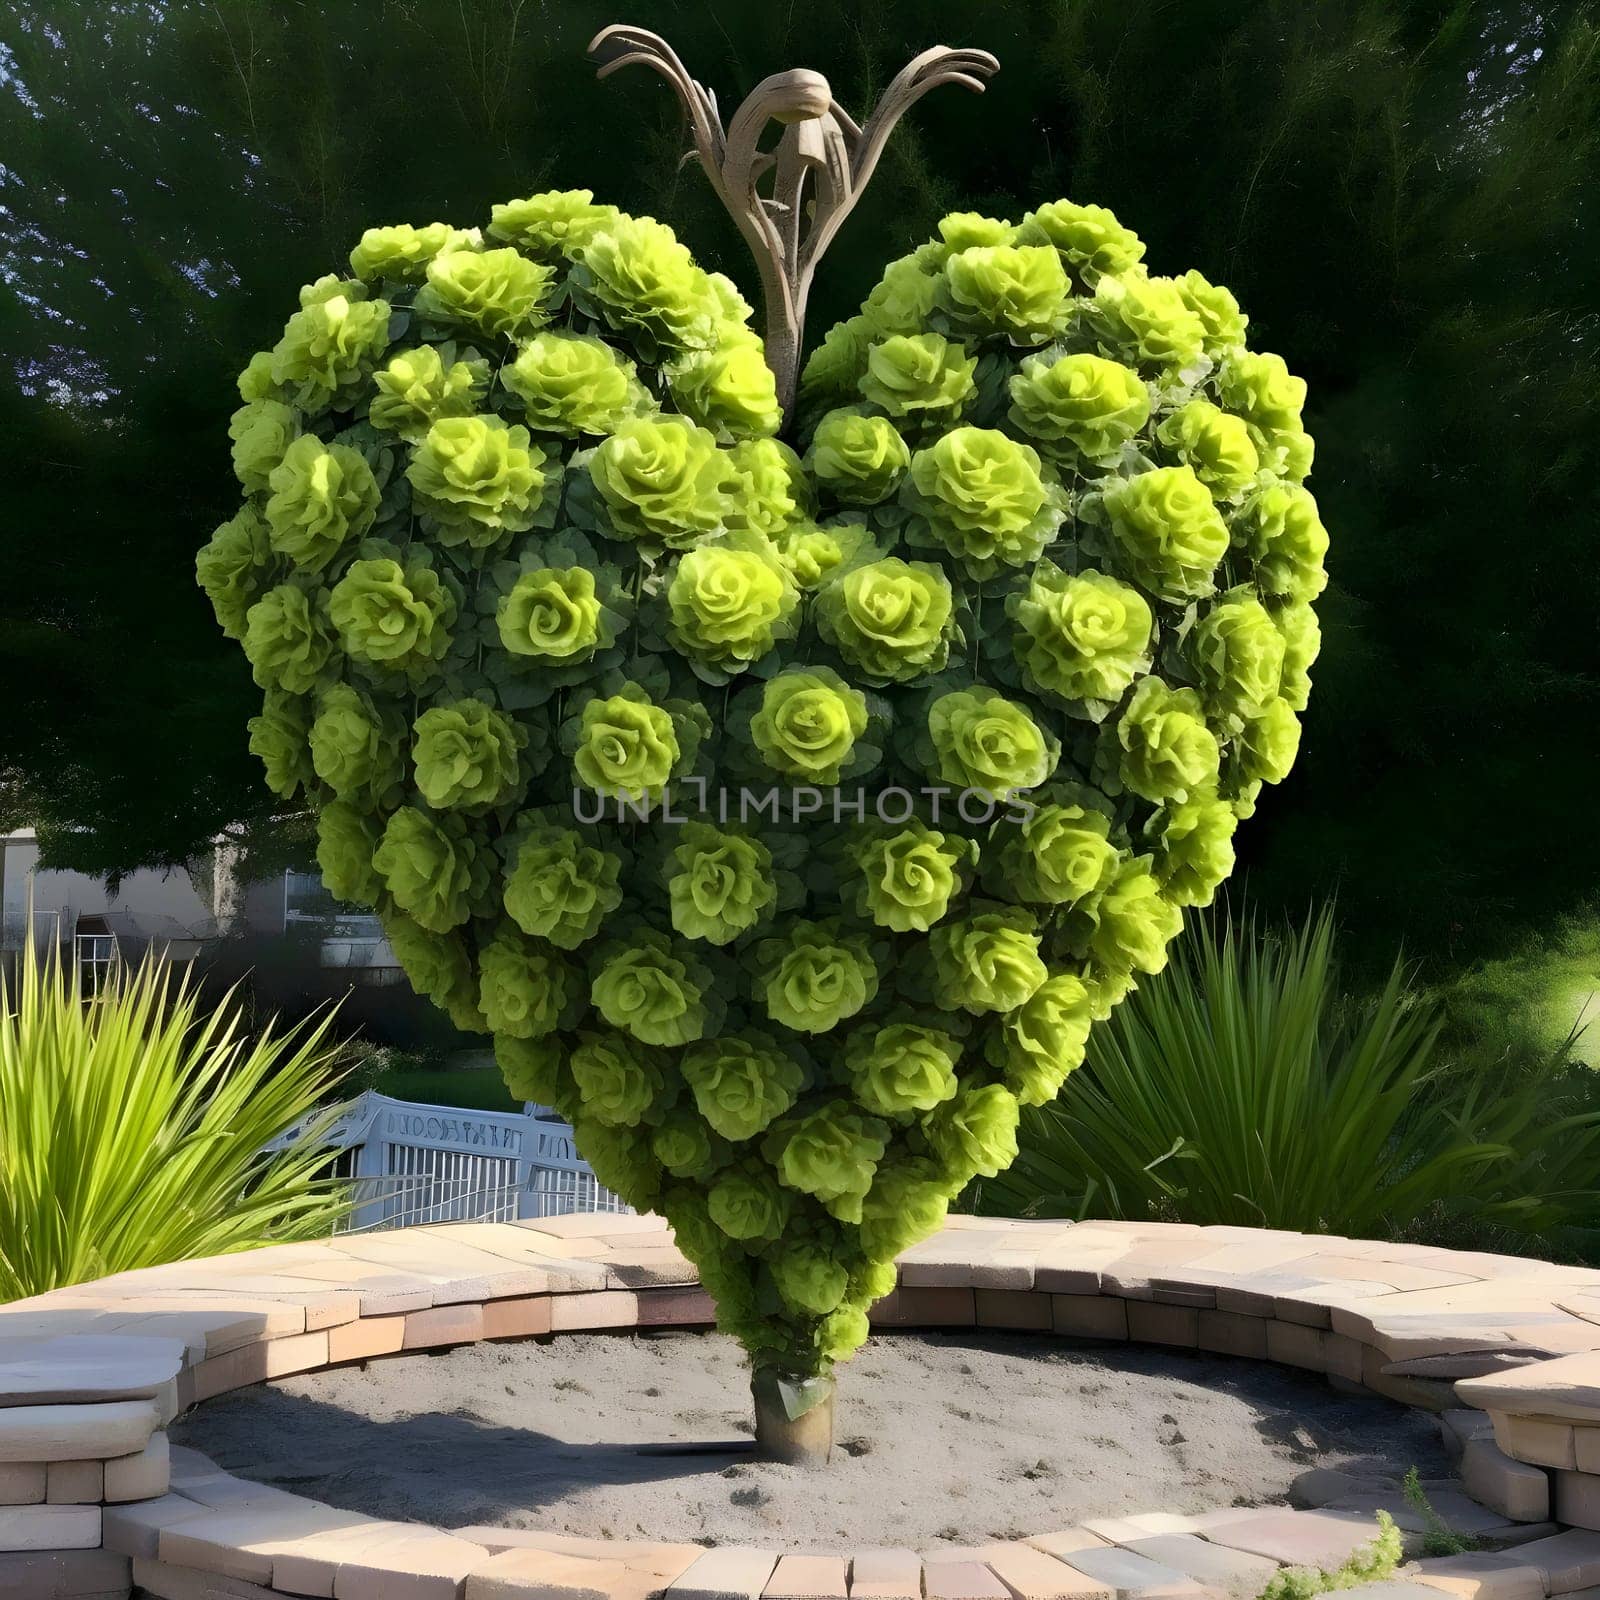 A heart-shaped formation of lush green plants, symbolizing love and the beauty of nature.